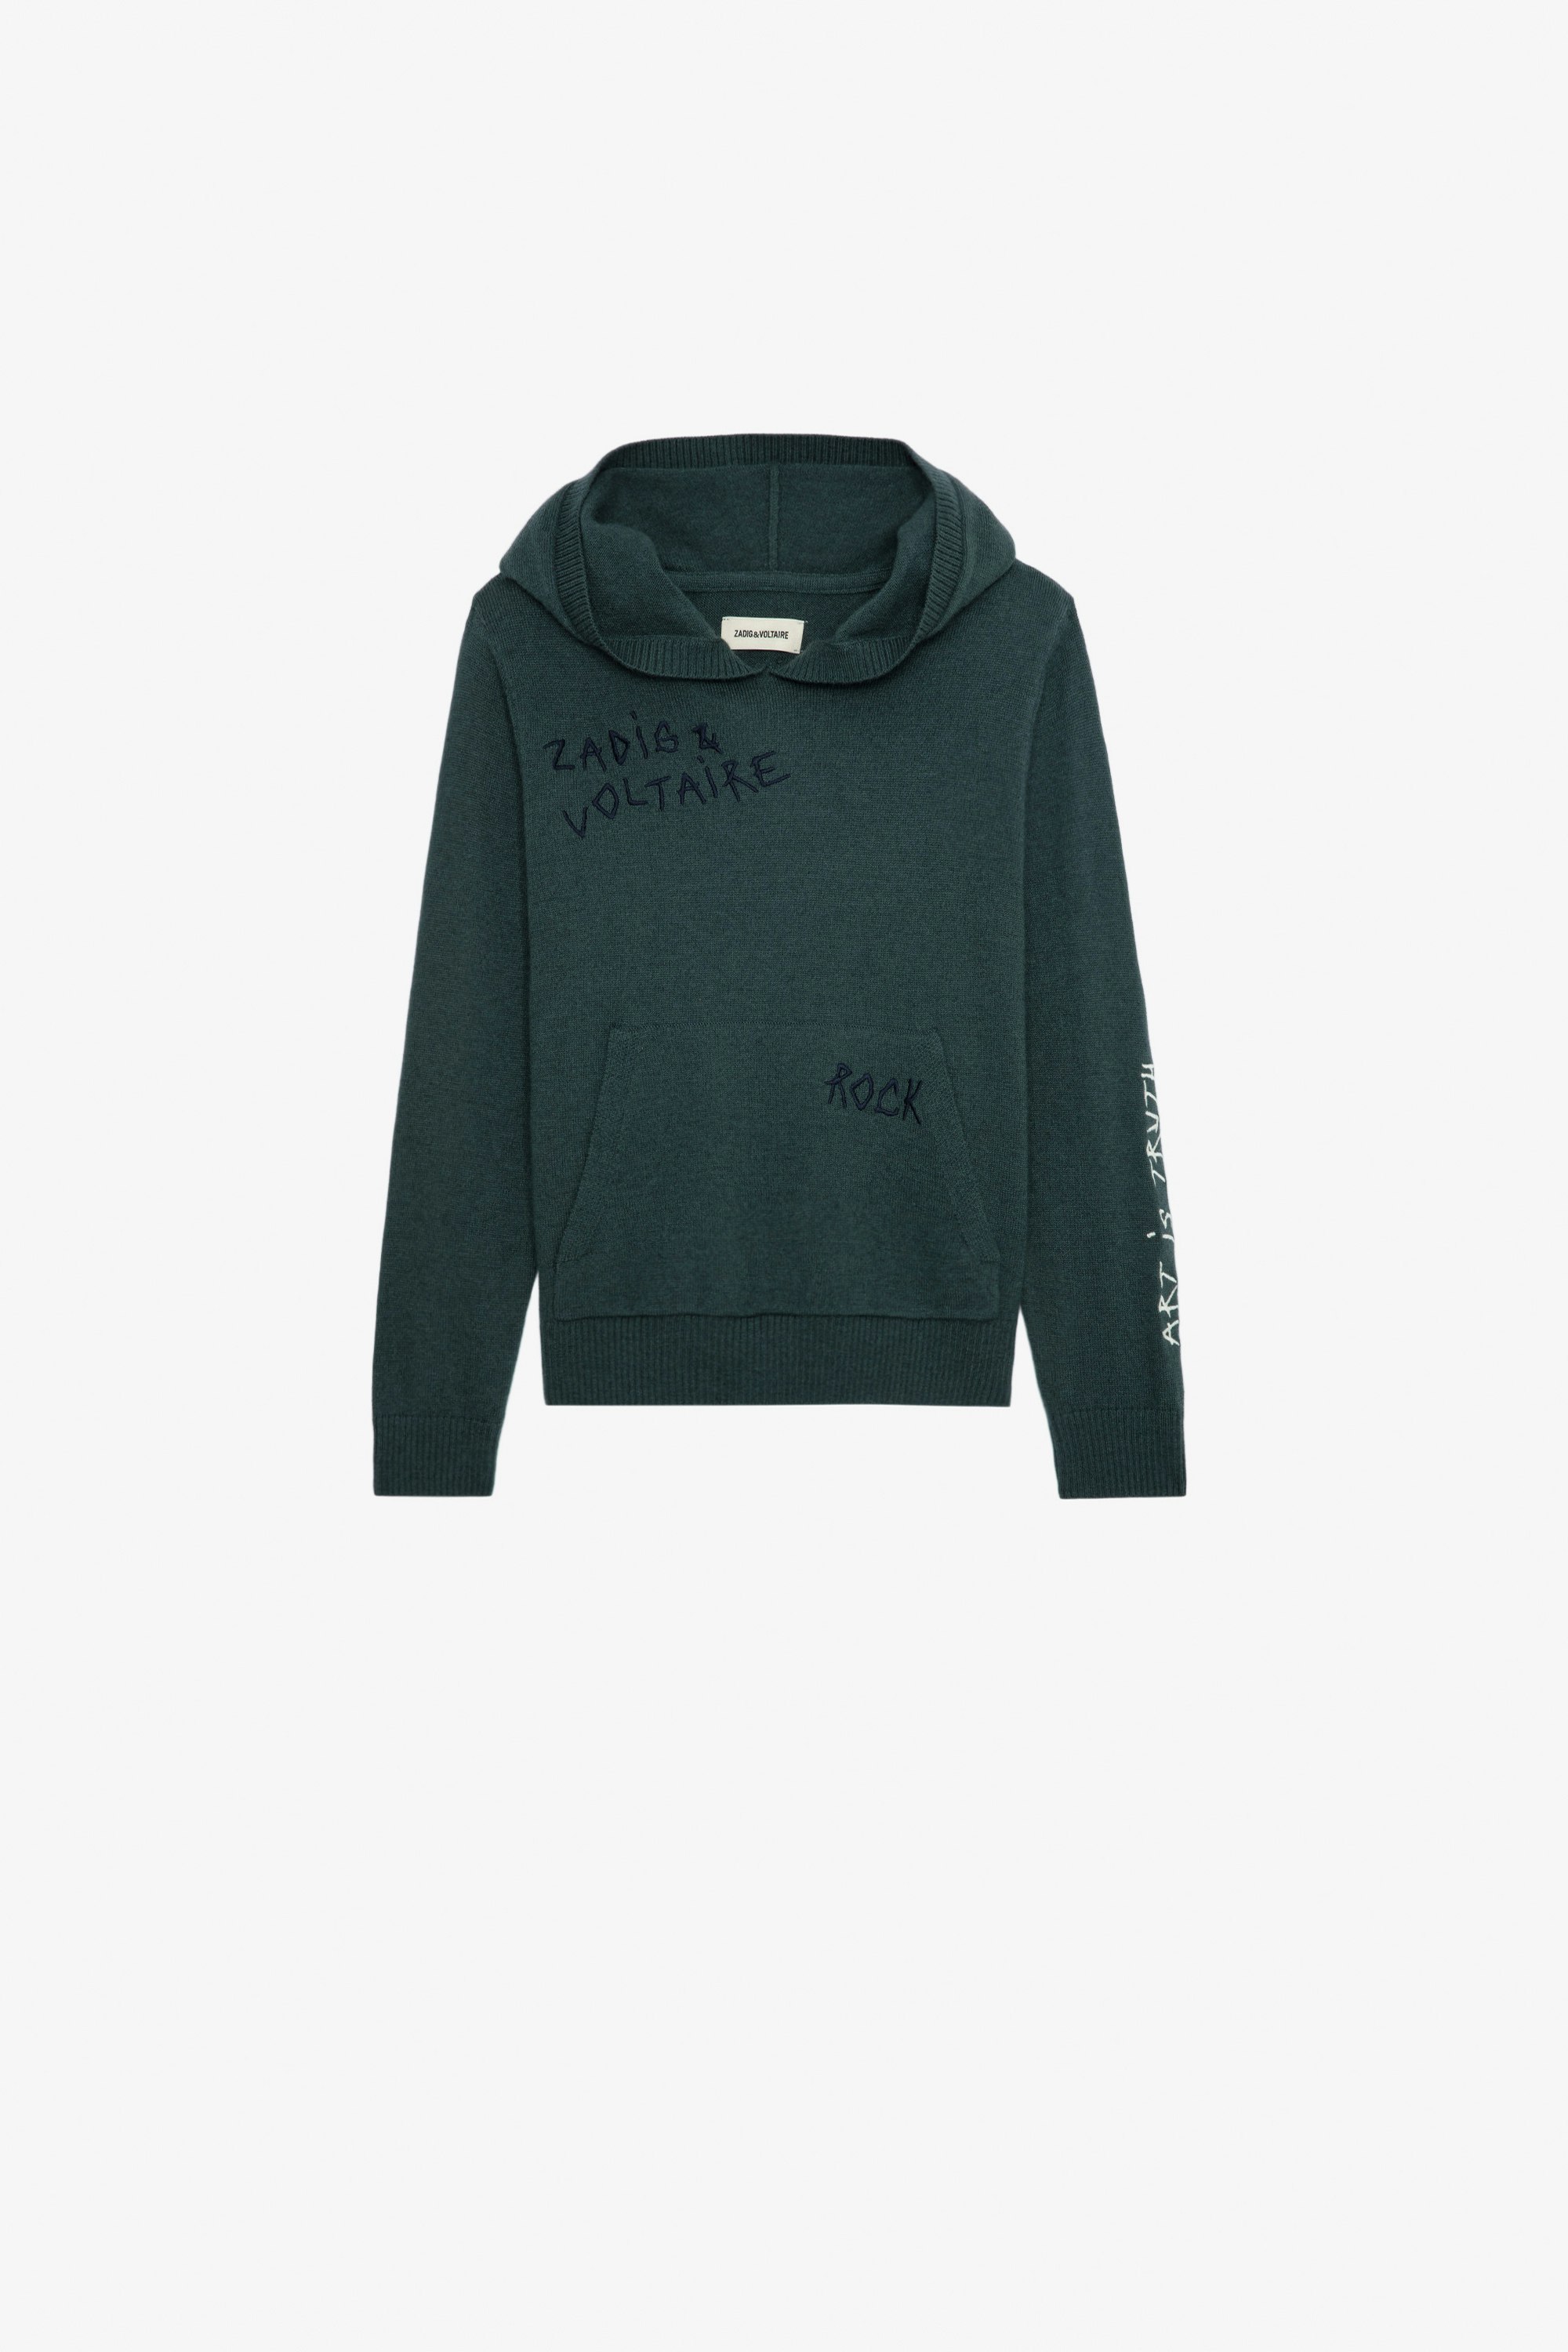 Andy Boys’ Sweatshirt Boys’ dark green knit hoodie with illustrations and embroidery.